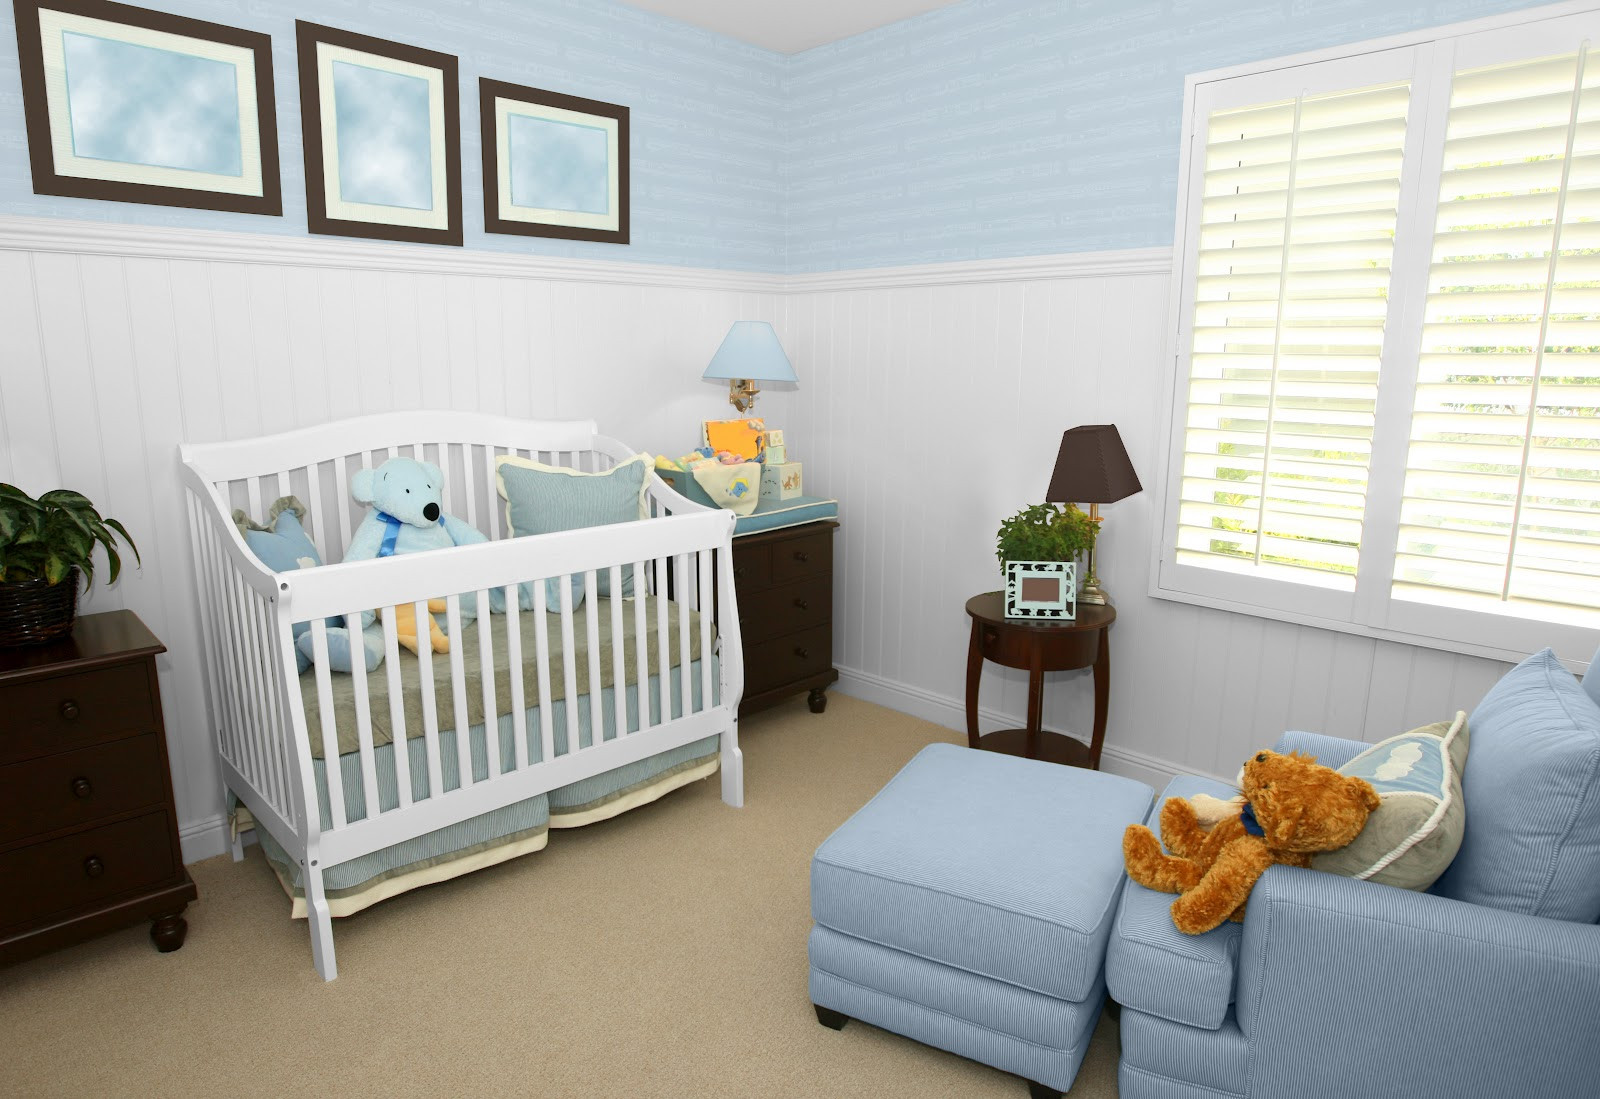 Room Decoration For Baby
 Top 10 Baby Nursery Room Colors And Decorating Ideas